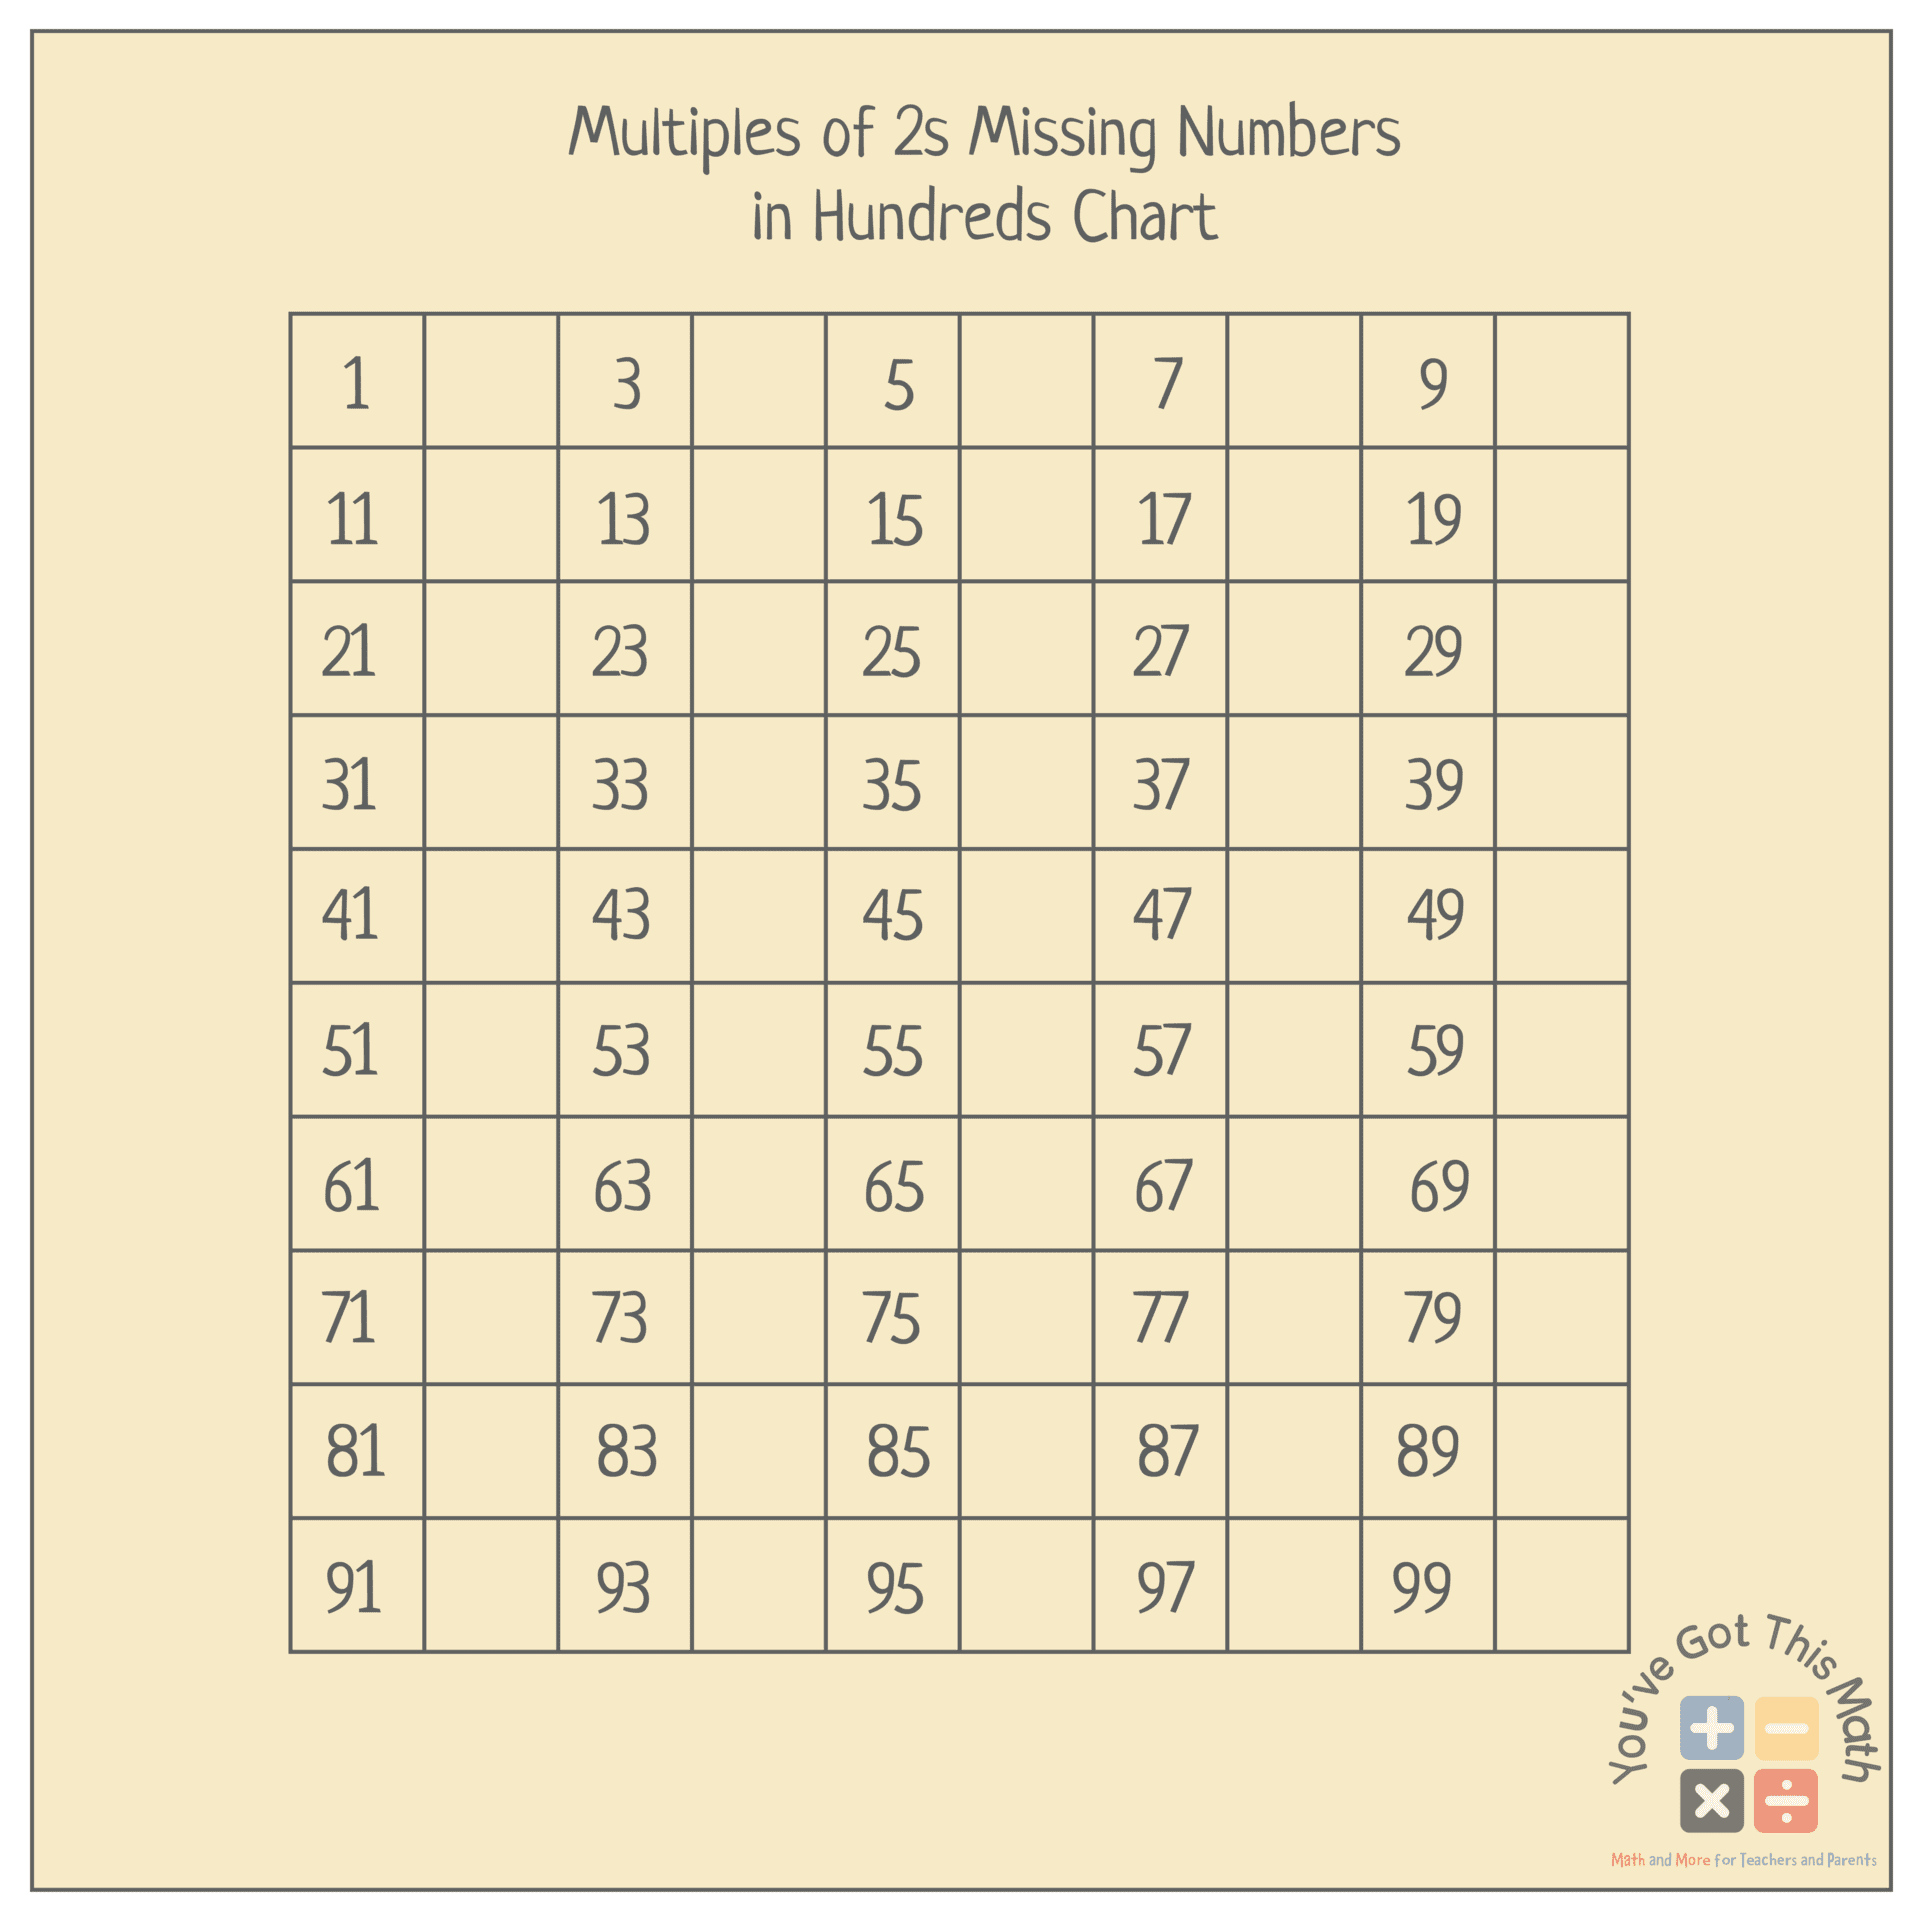 multiples of 2s missing numbers in hundreds chart